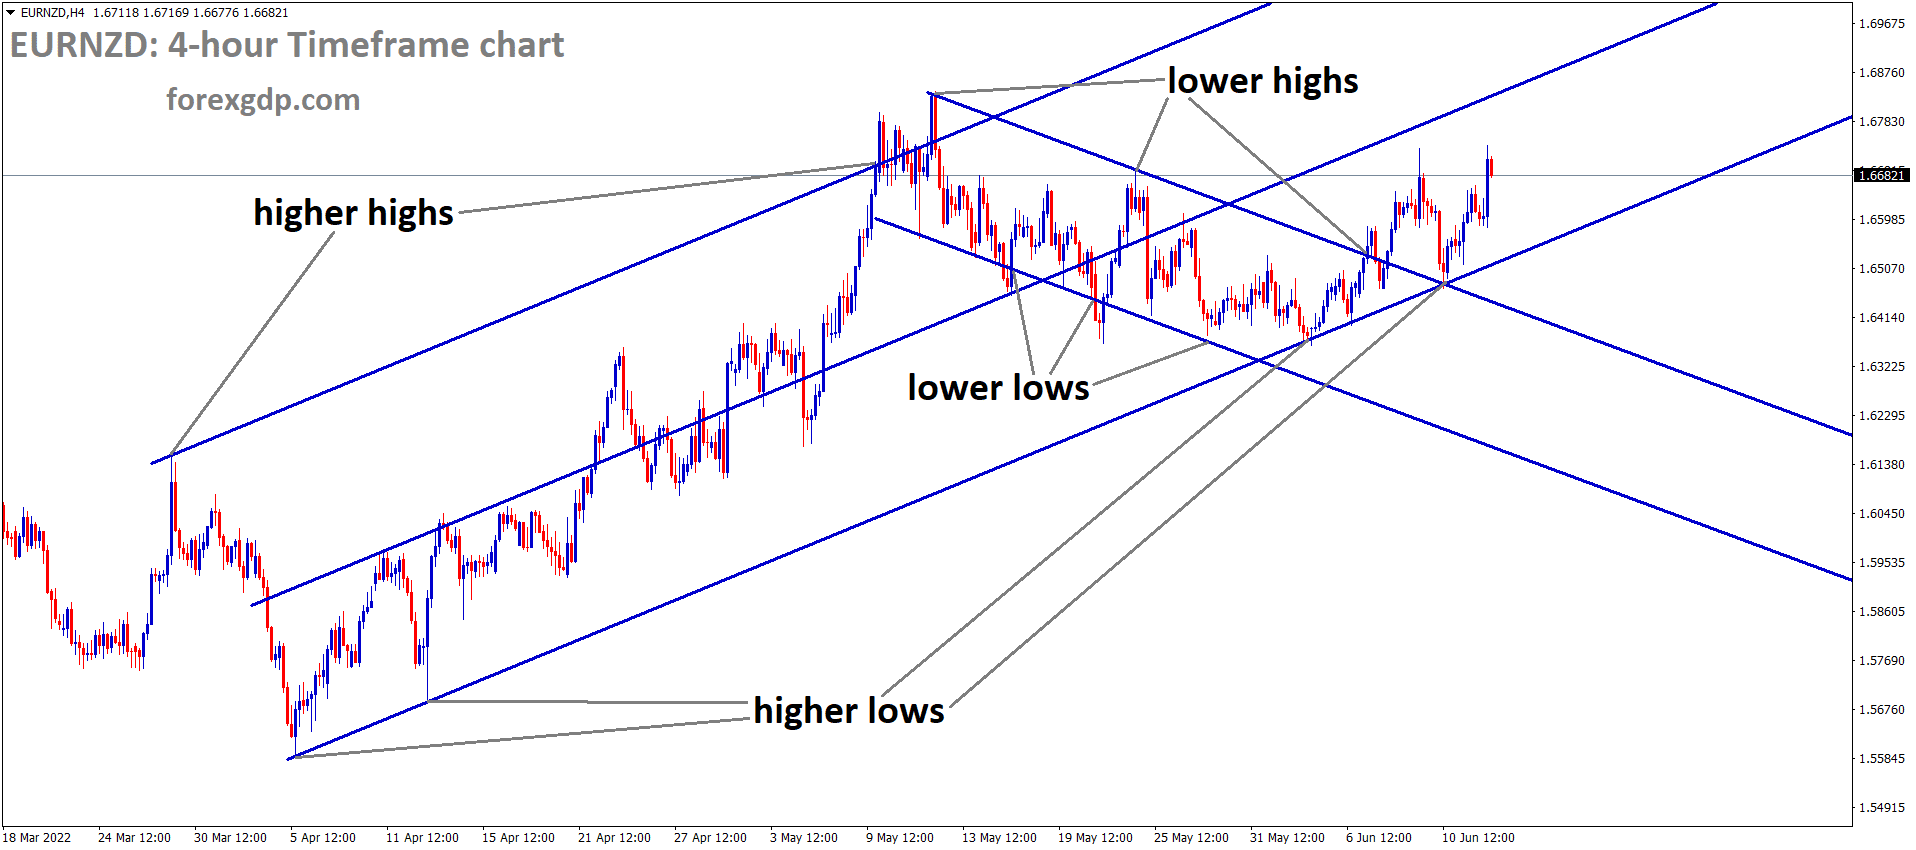 EURNZD is moving in an Ascending channel